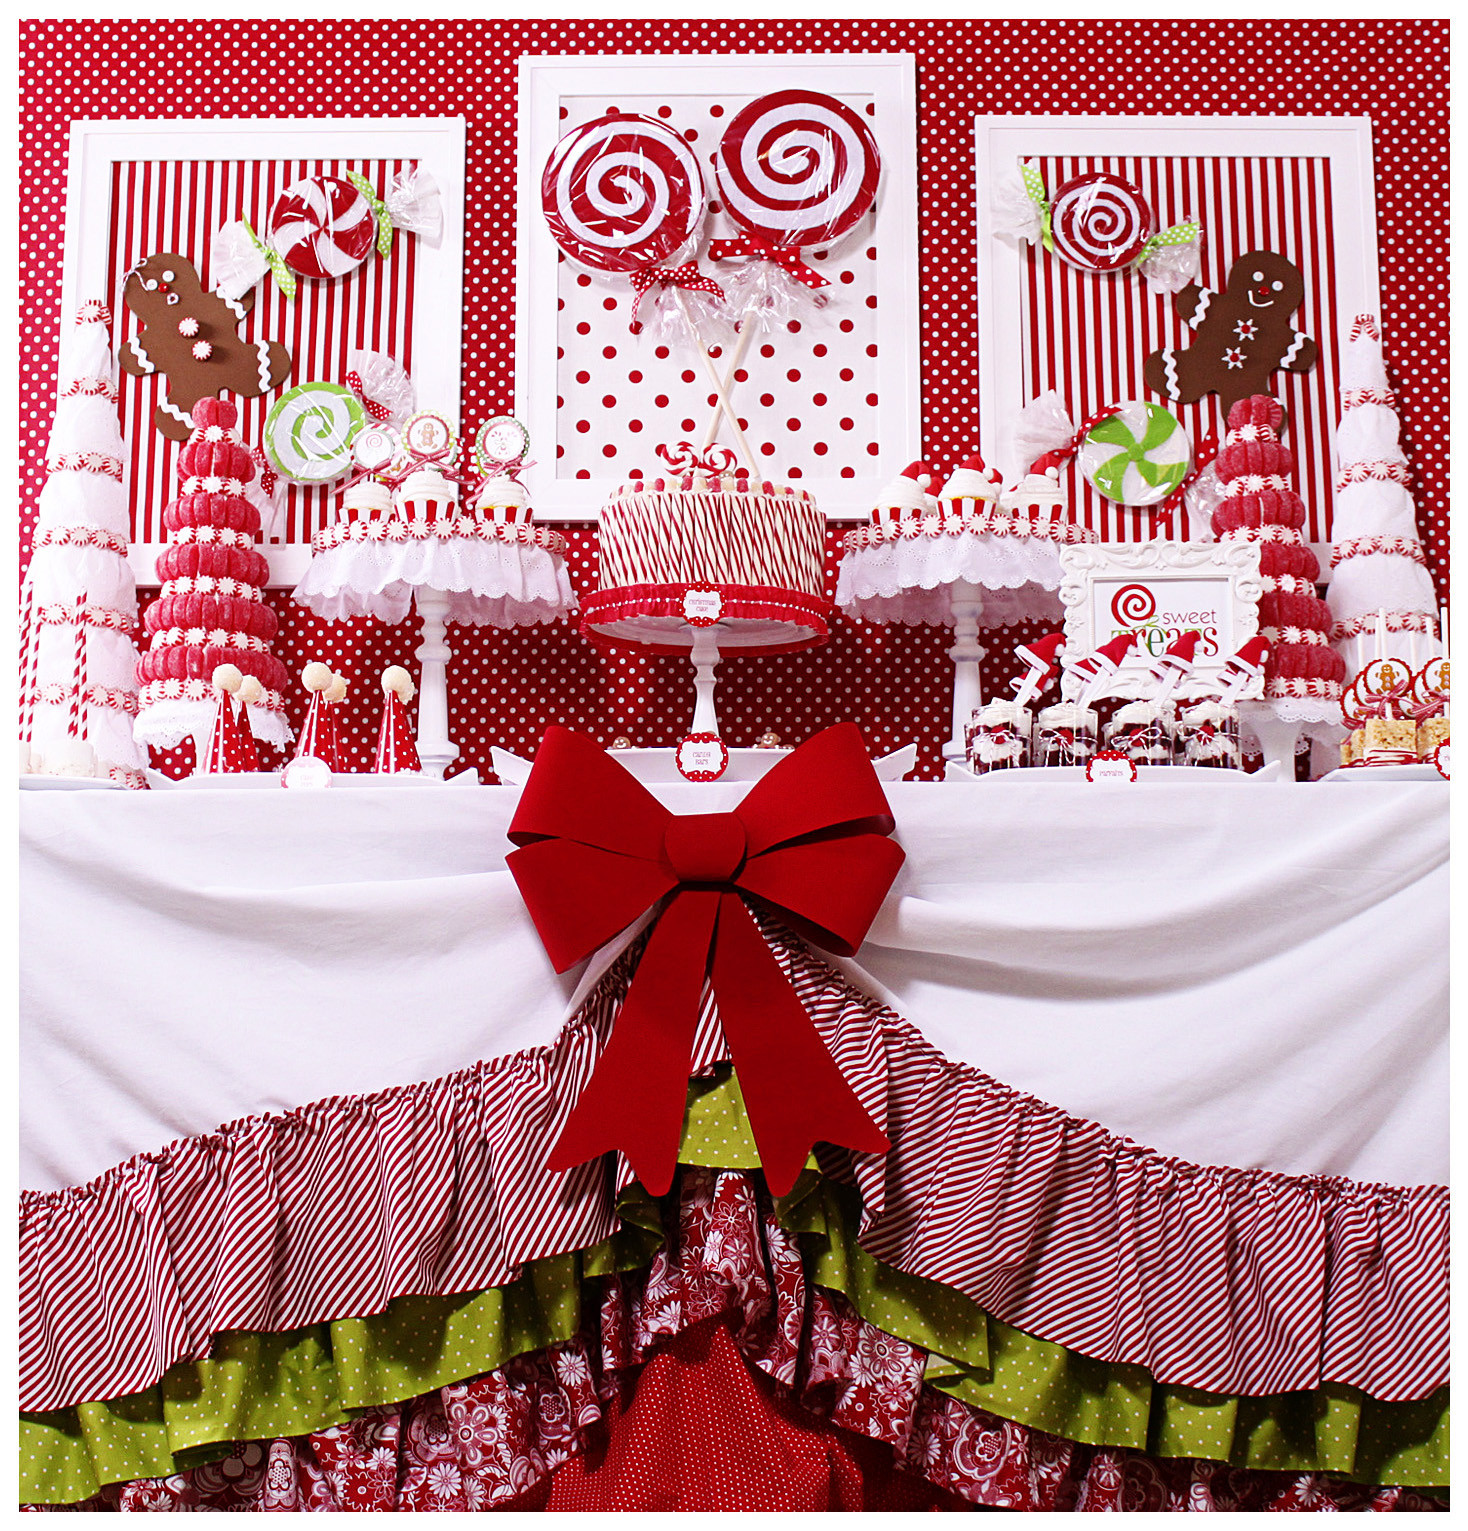 Christmas Party Decorations Ideas
 Kara s Party Ideas Candy Land Christmas Party